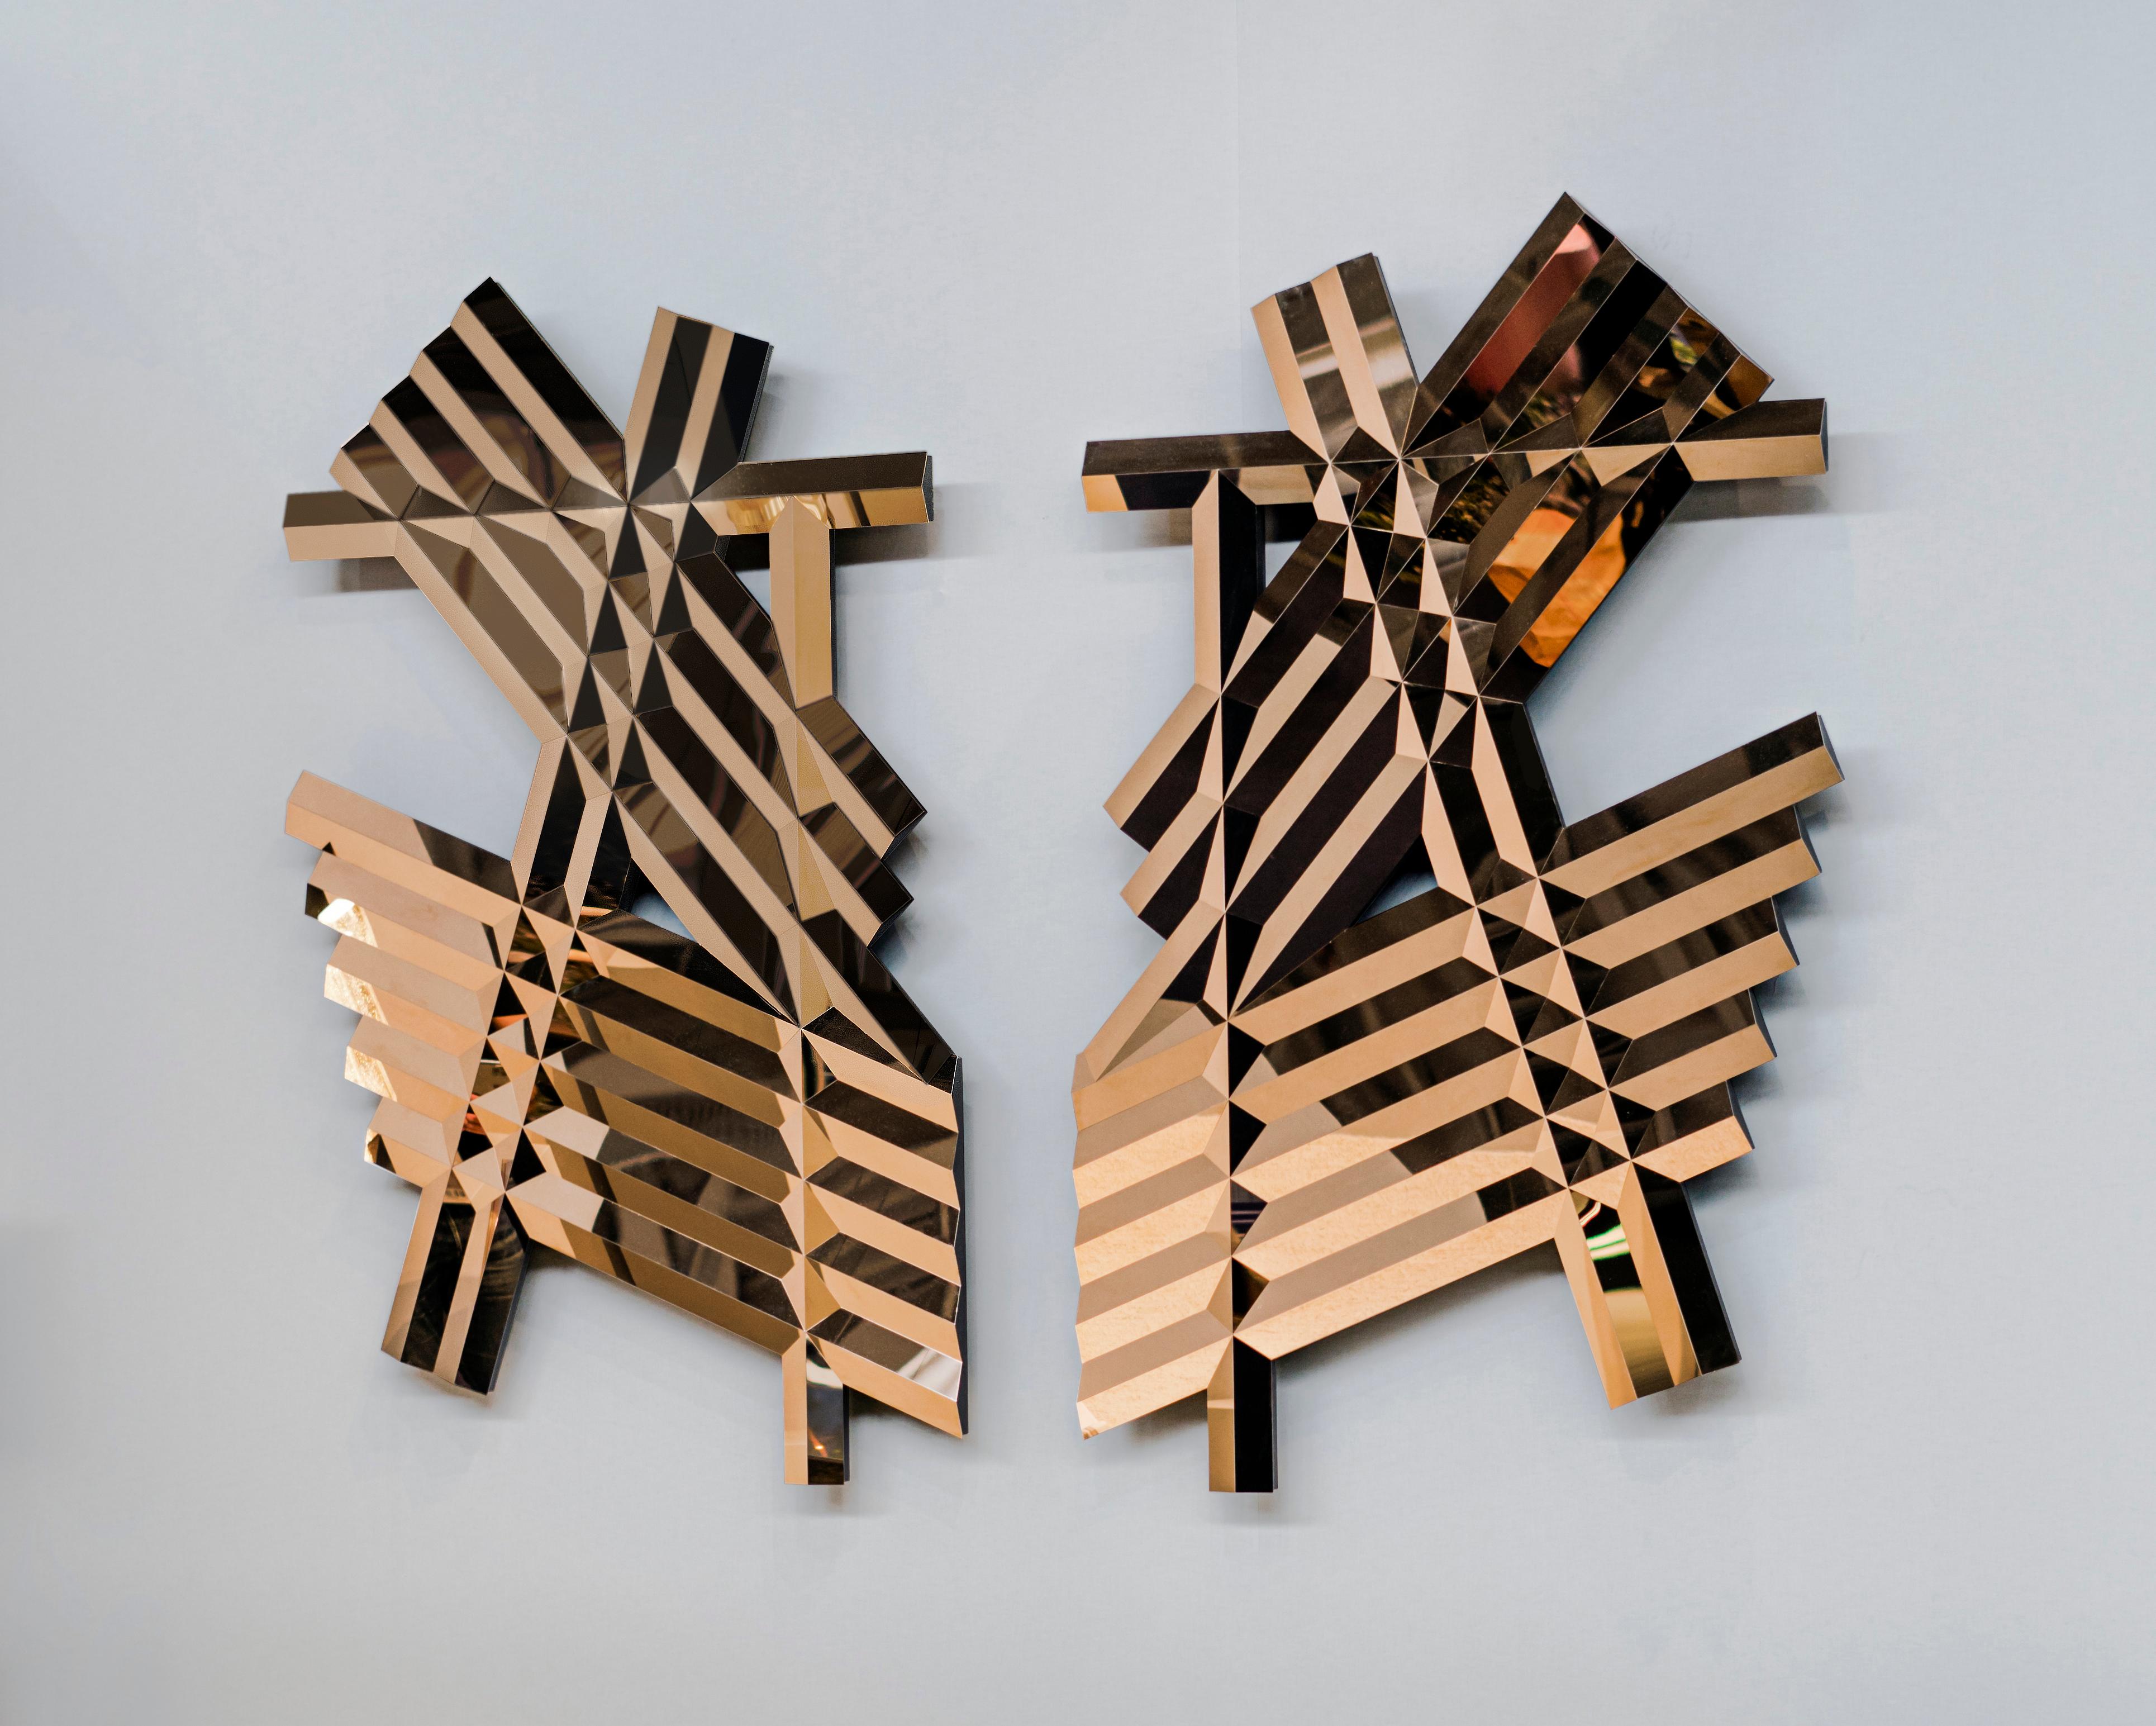 Set of 2 Galactica A Mirror Sculpture by SB26
Dimensions: W 120 x D 10 x H 82 cm
Materials: Stainless Steel, Copper finishing.

Galactica is a visual vocabulary, inspired by both retro-futurism and architecture, developed by Samuel. Wall sculptures